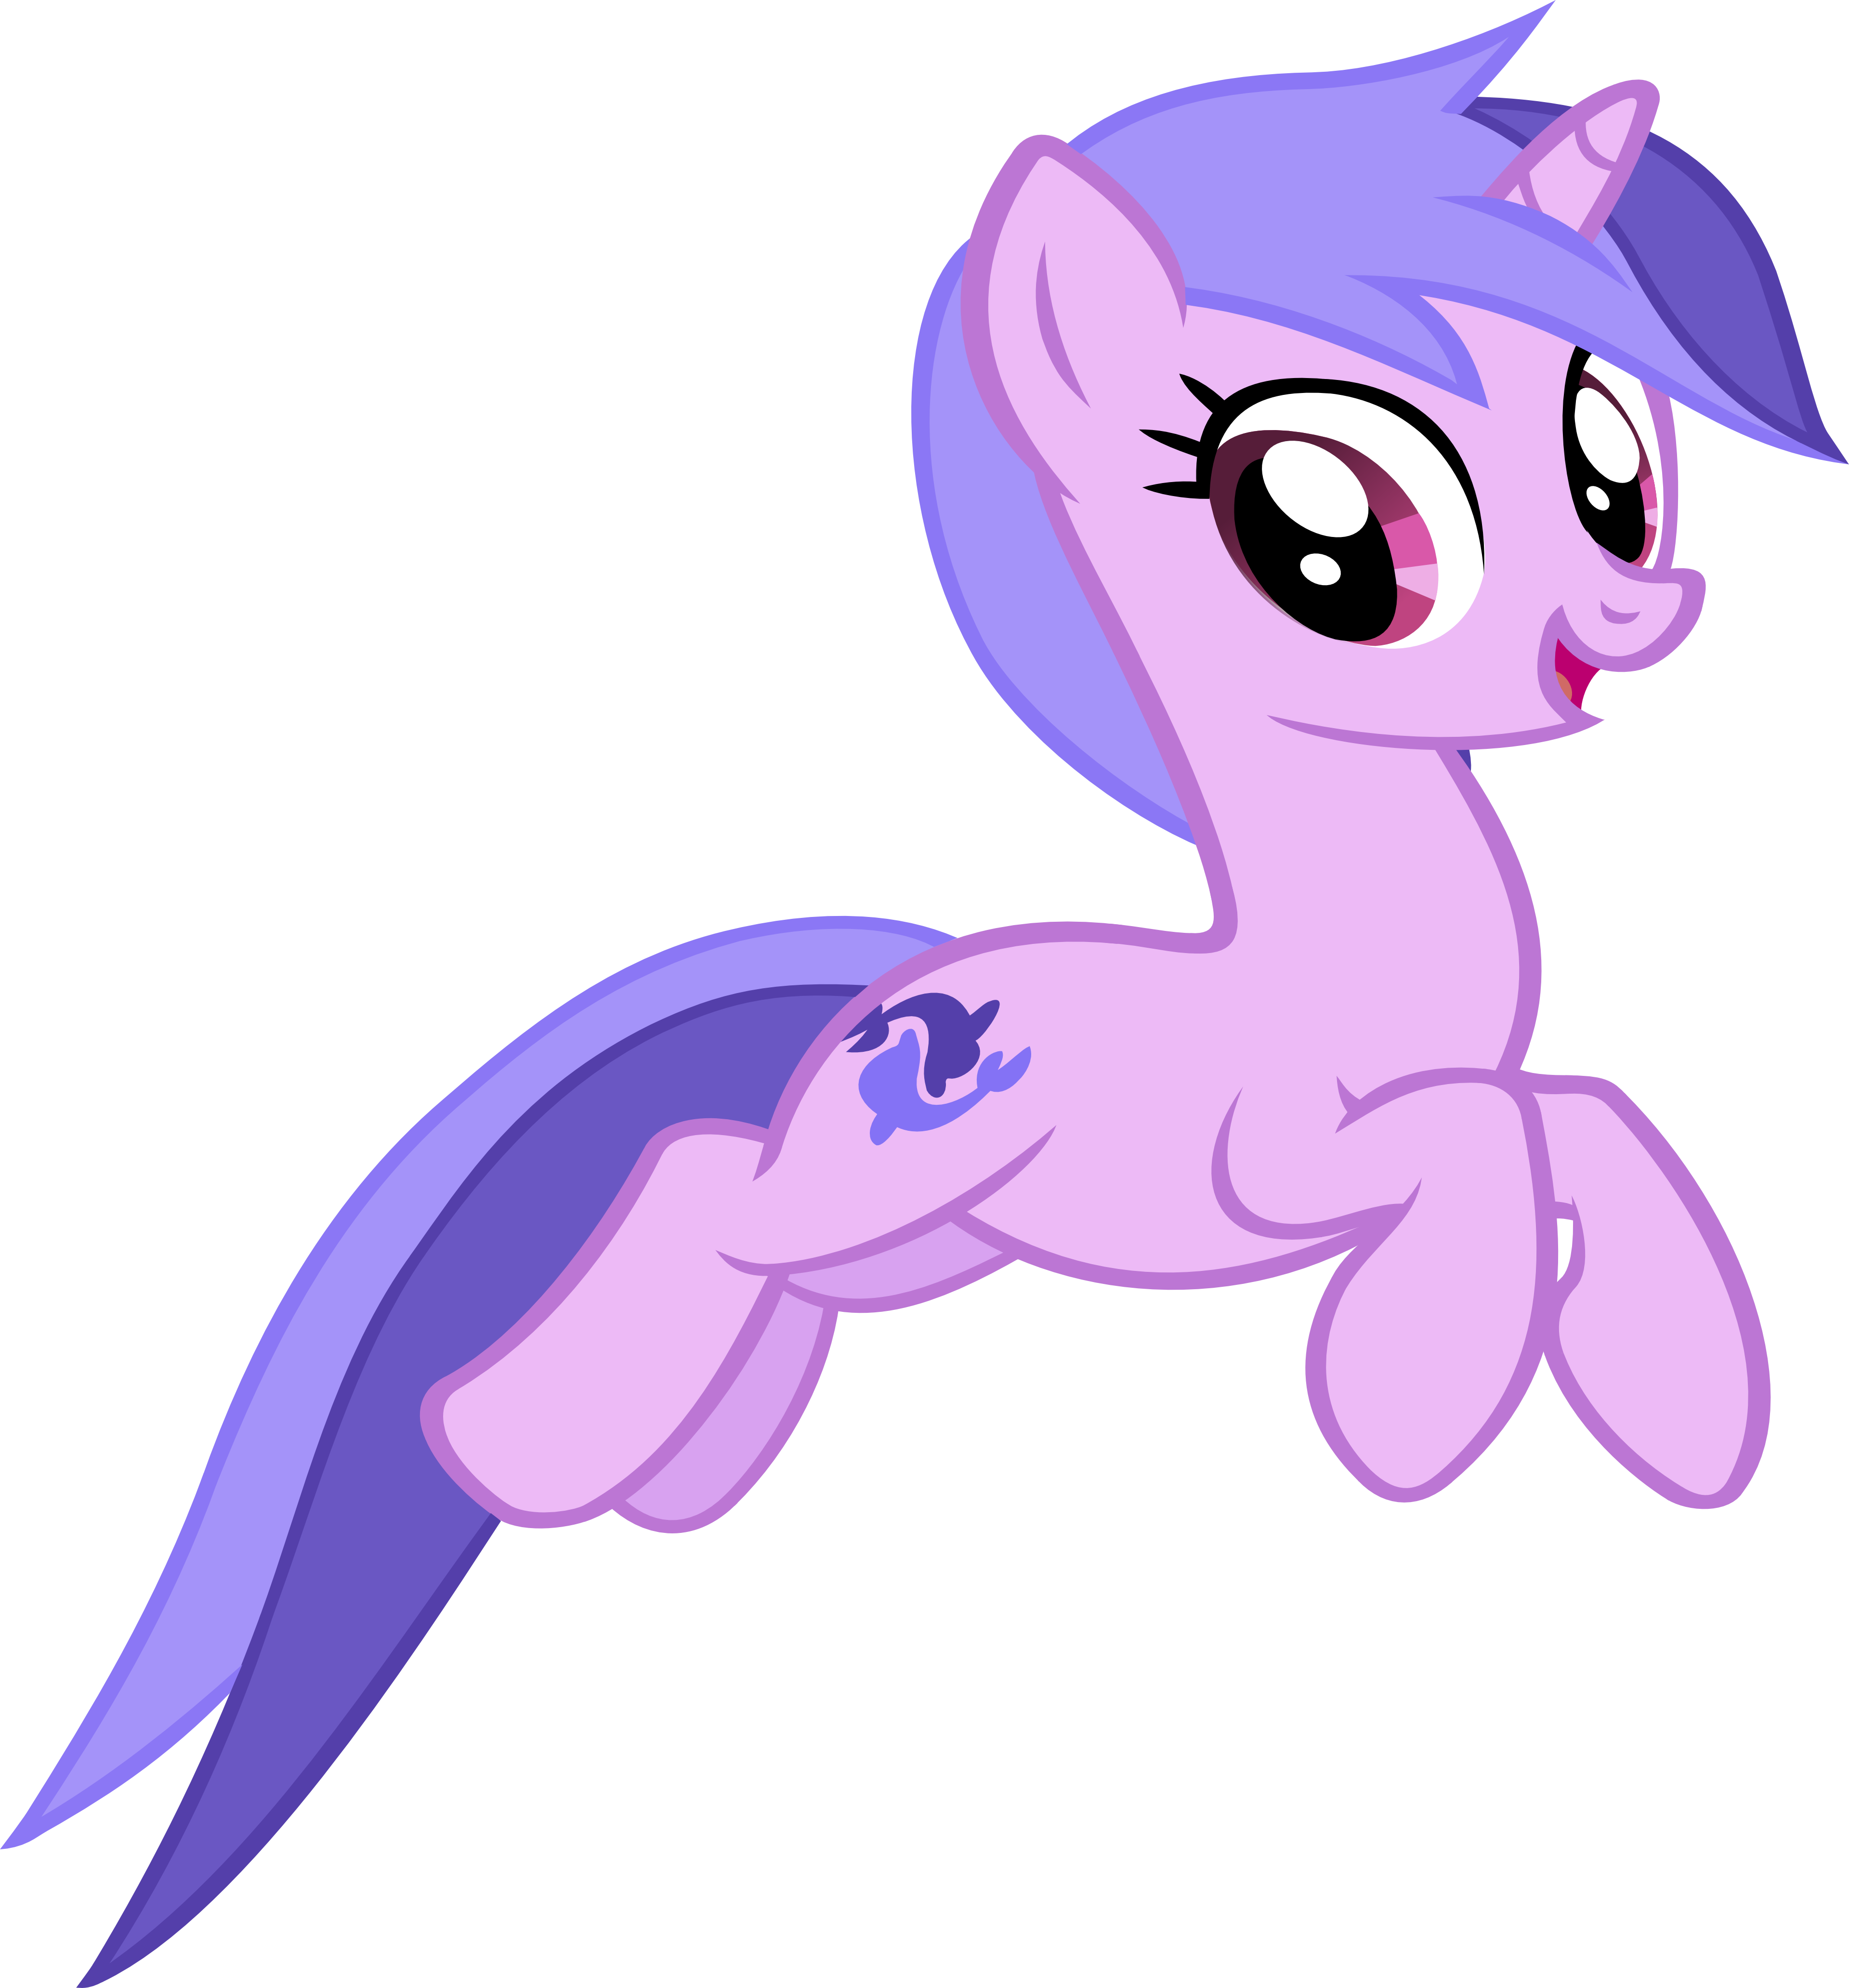 happy_sea_swirl_by_ironm17-db2at39.png